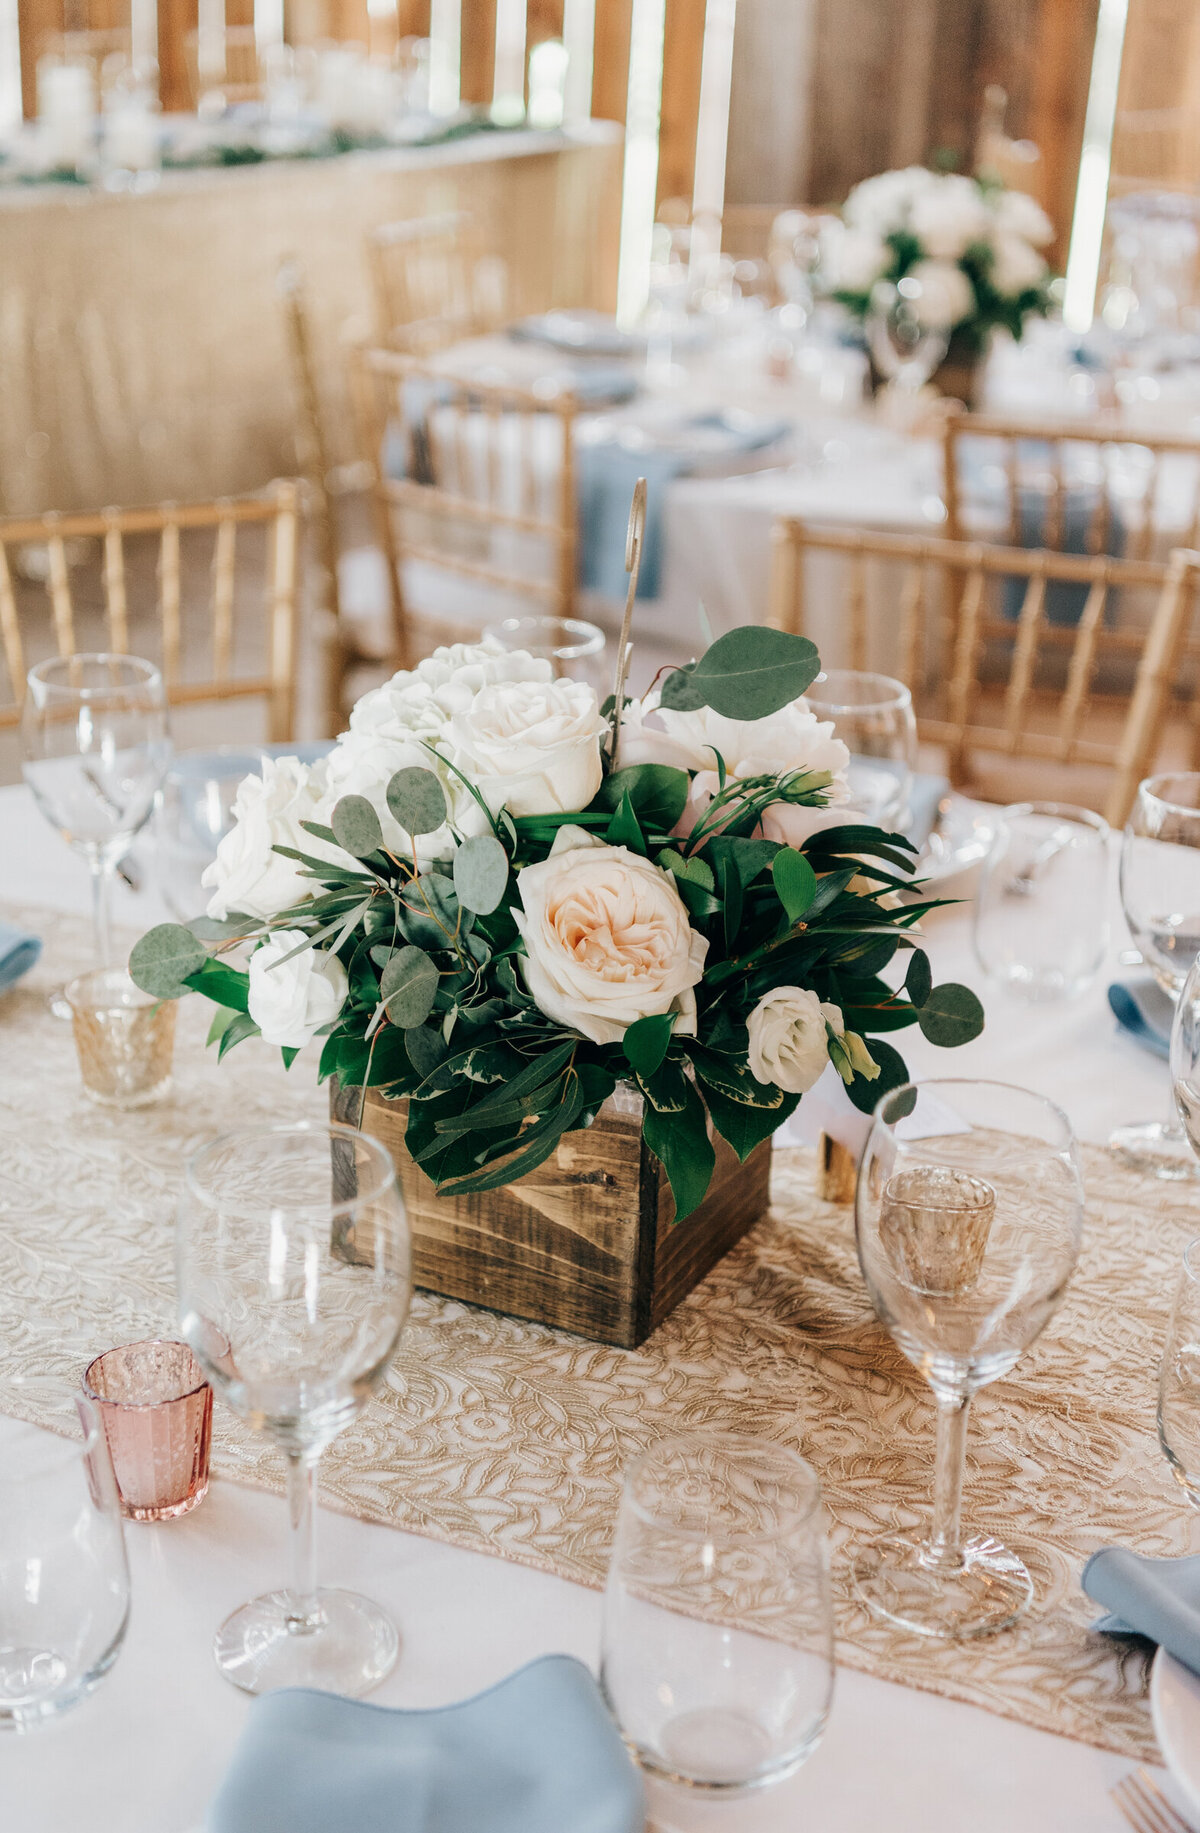 Elegant pink and white roses and eucalyptus centrepieces at glamorous barn wedding reception